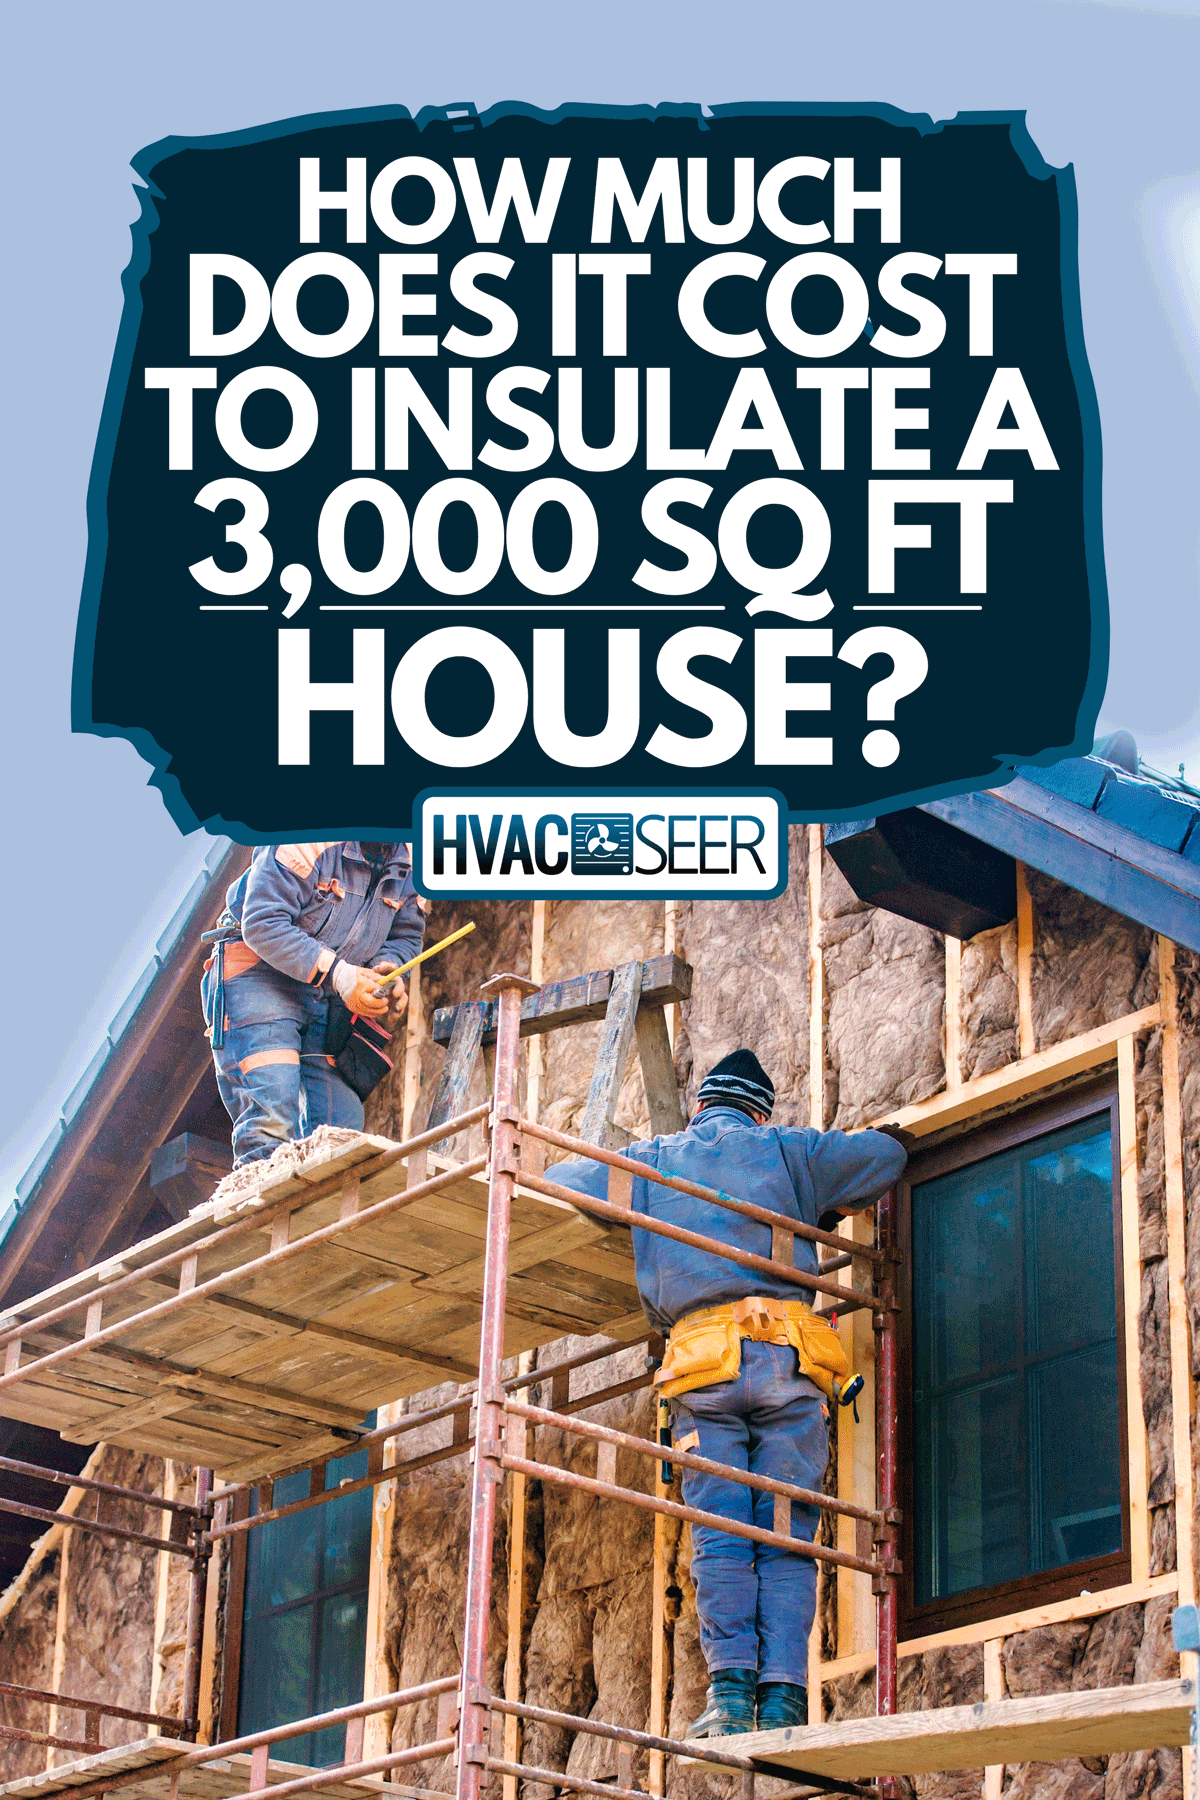 Construction workers insulating a house, How Much Does It Cost To Insulate A 3,000 Sq Ft House?